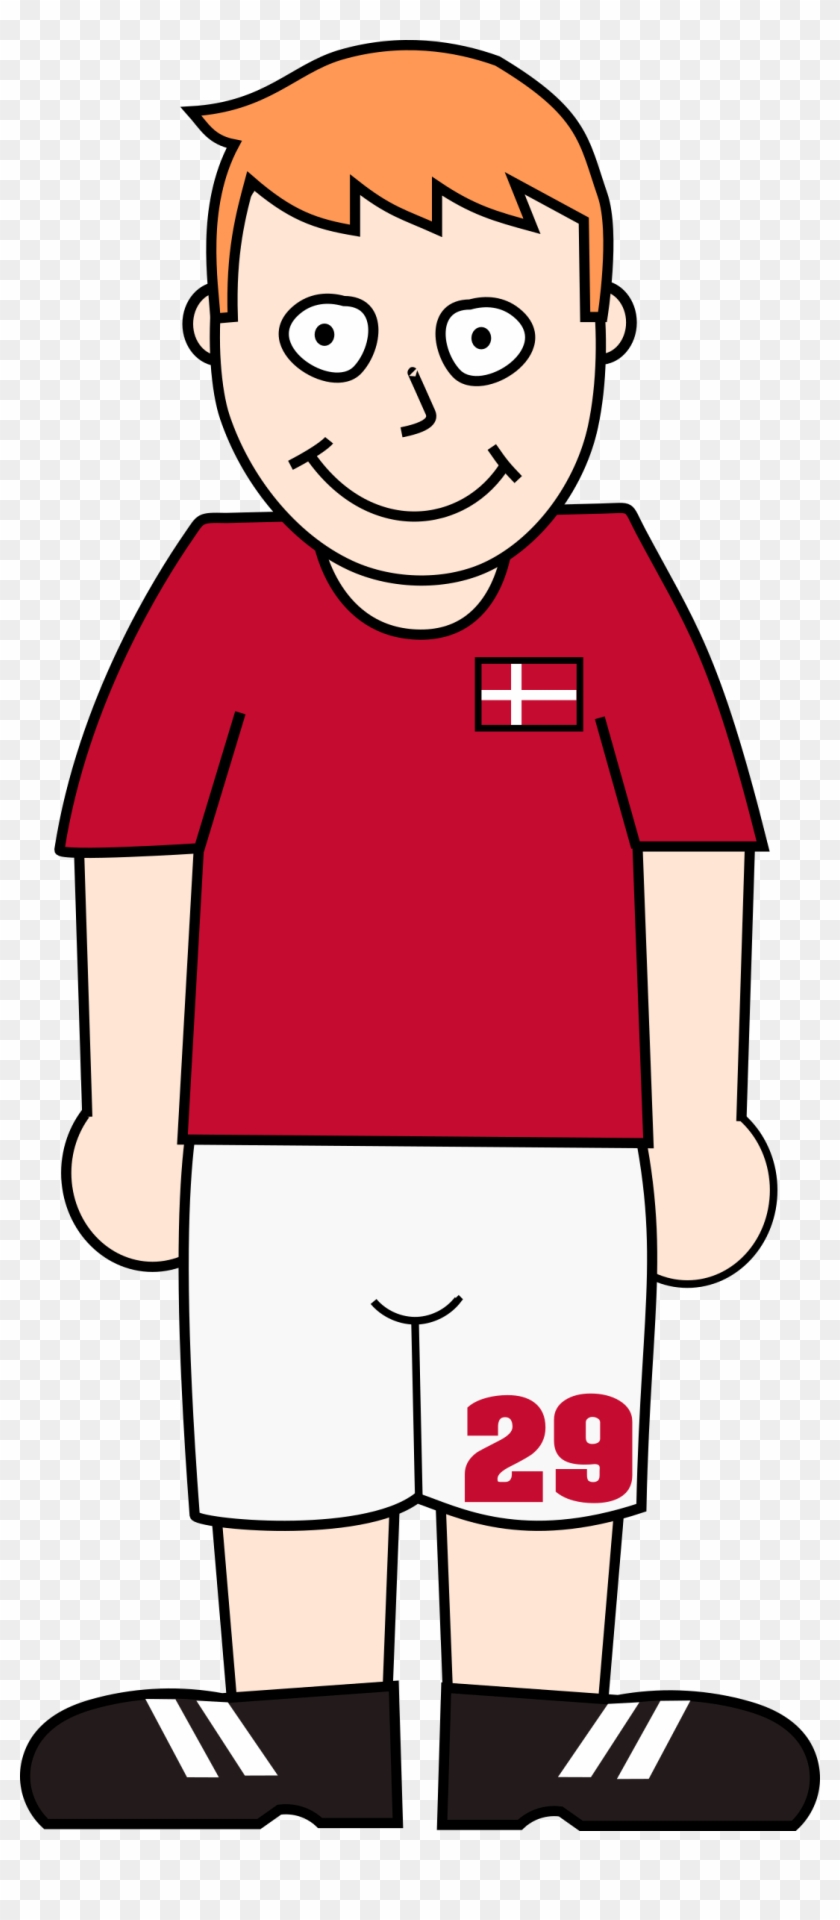 Big Image - Soccer Player Clipart #1702970